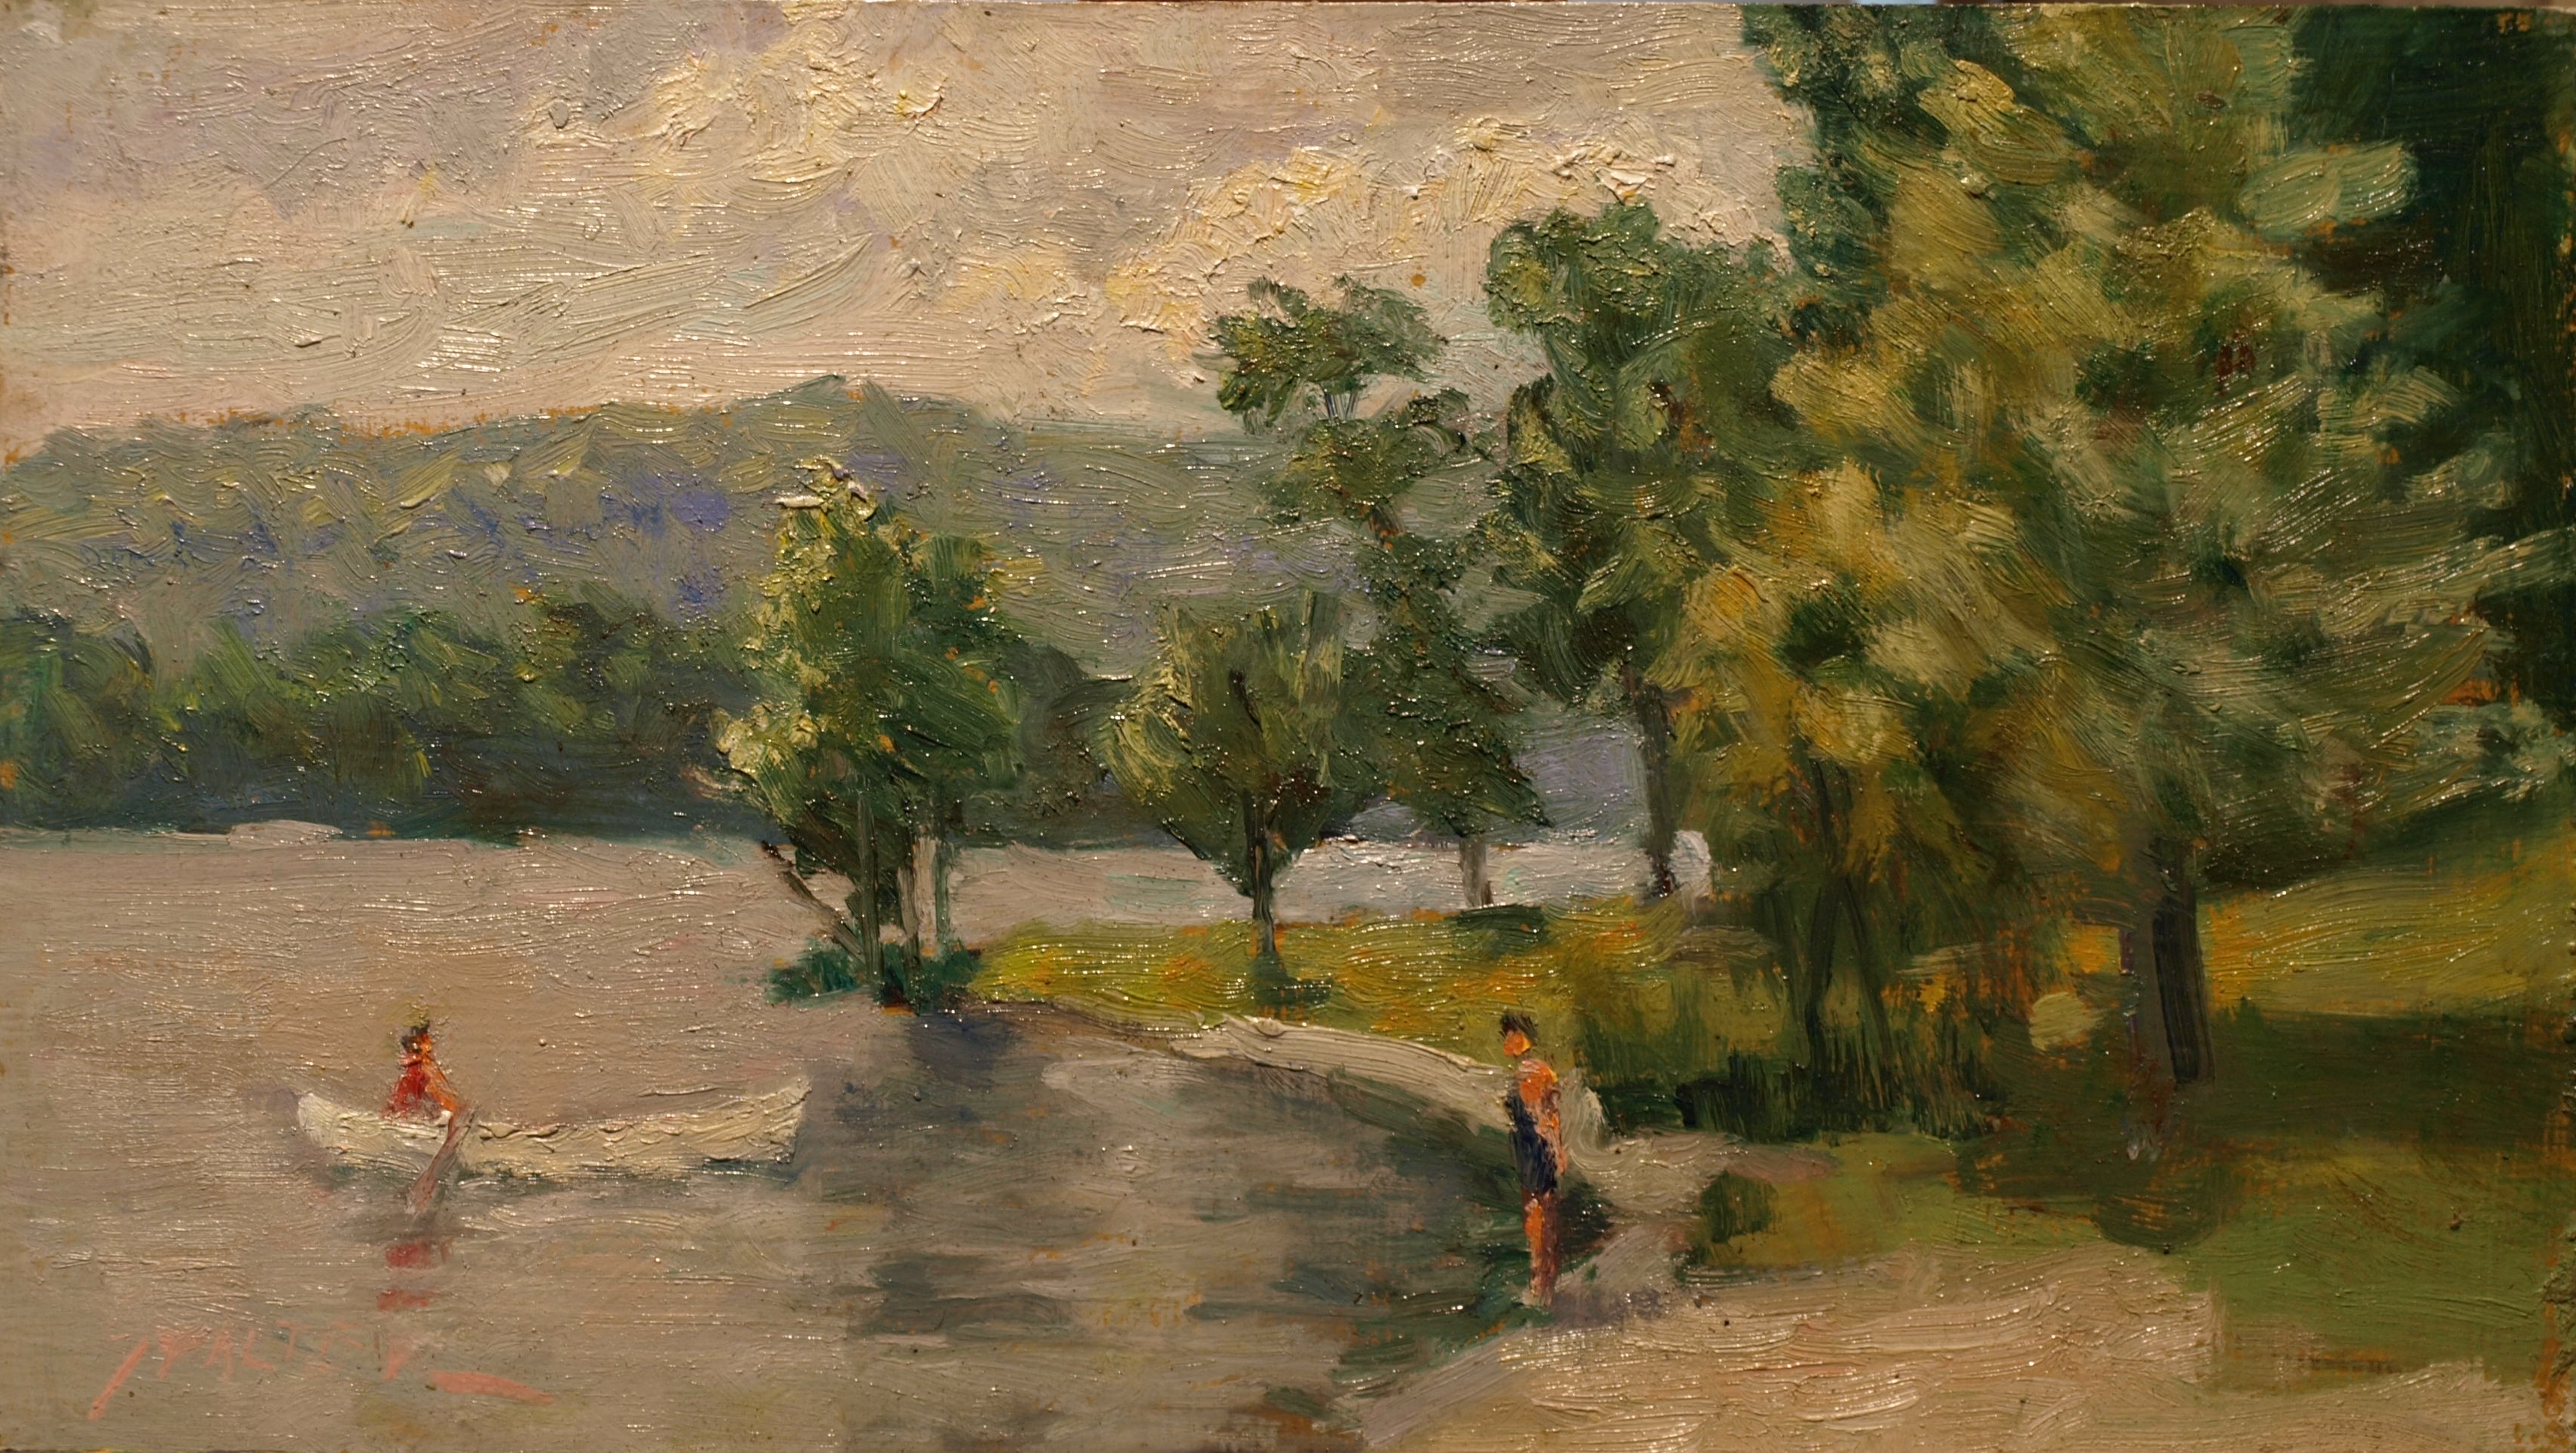 Canoeist, Oil on Canvas on Panel, 8 x 14 Inches, by Richard Stalter, $225